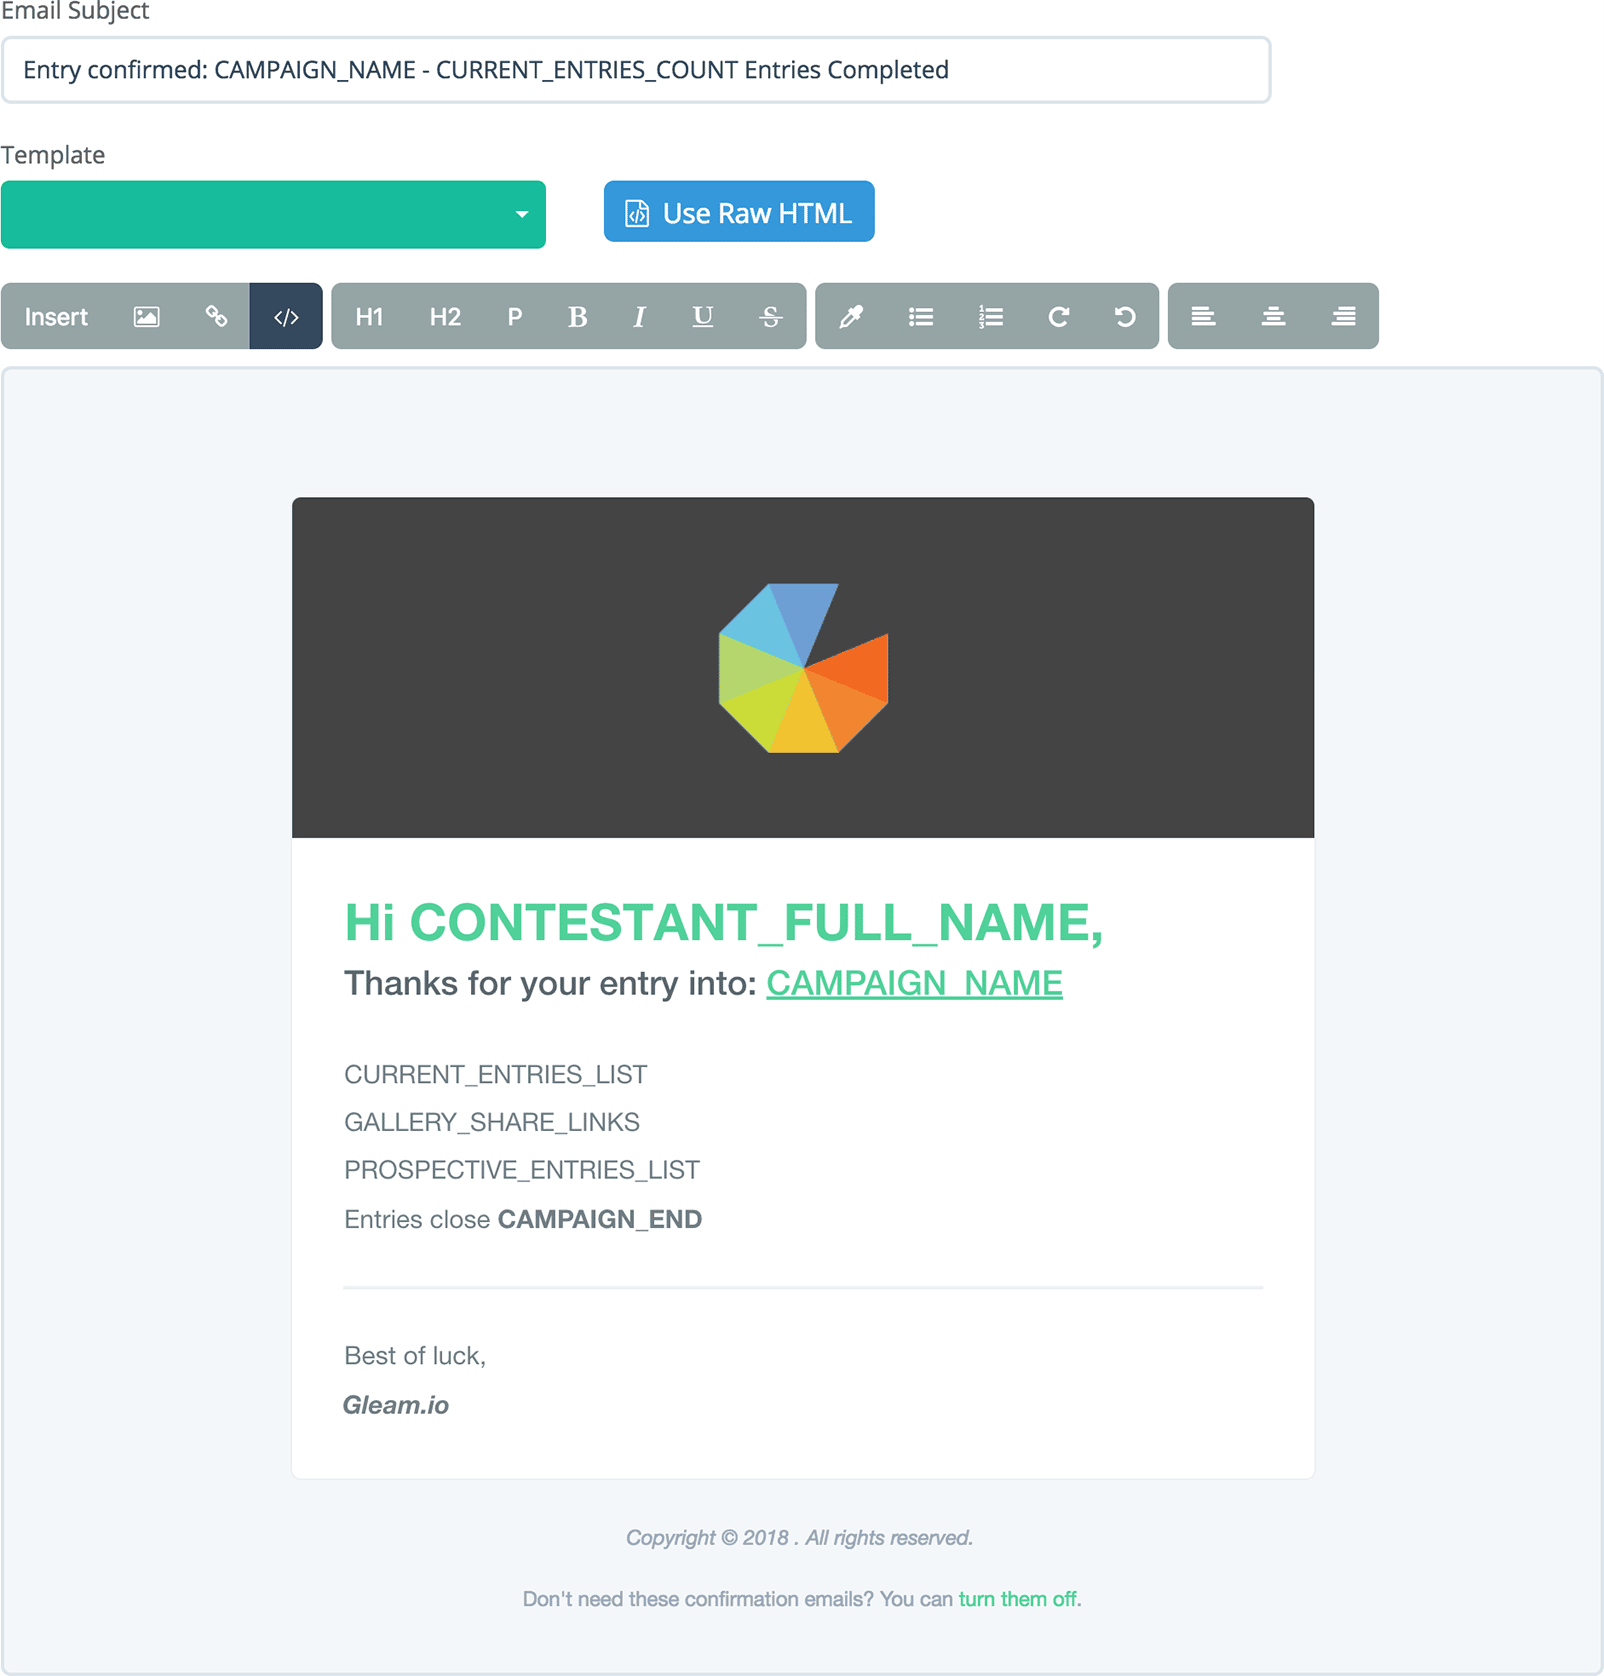 Gleam interface for custom emails